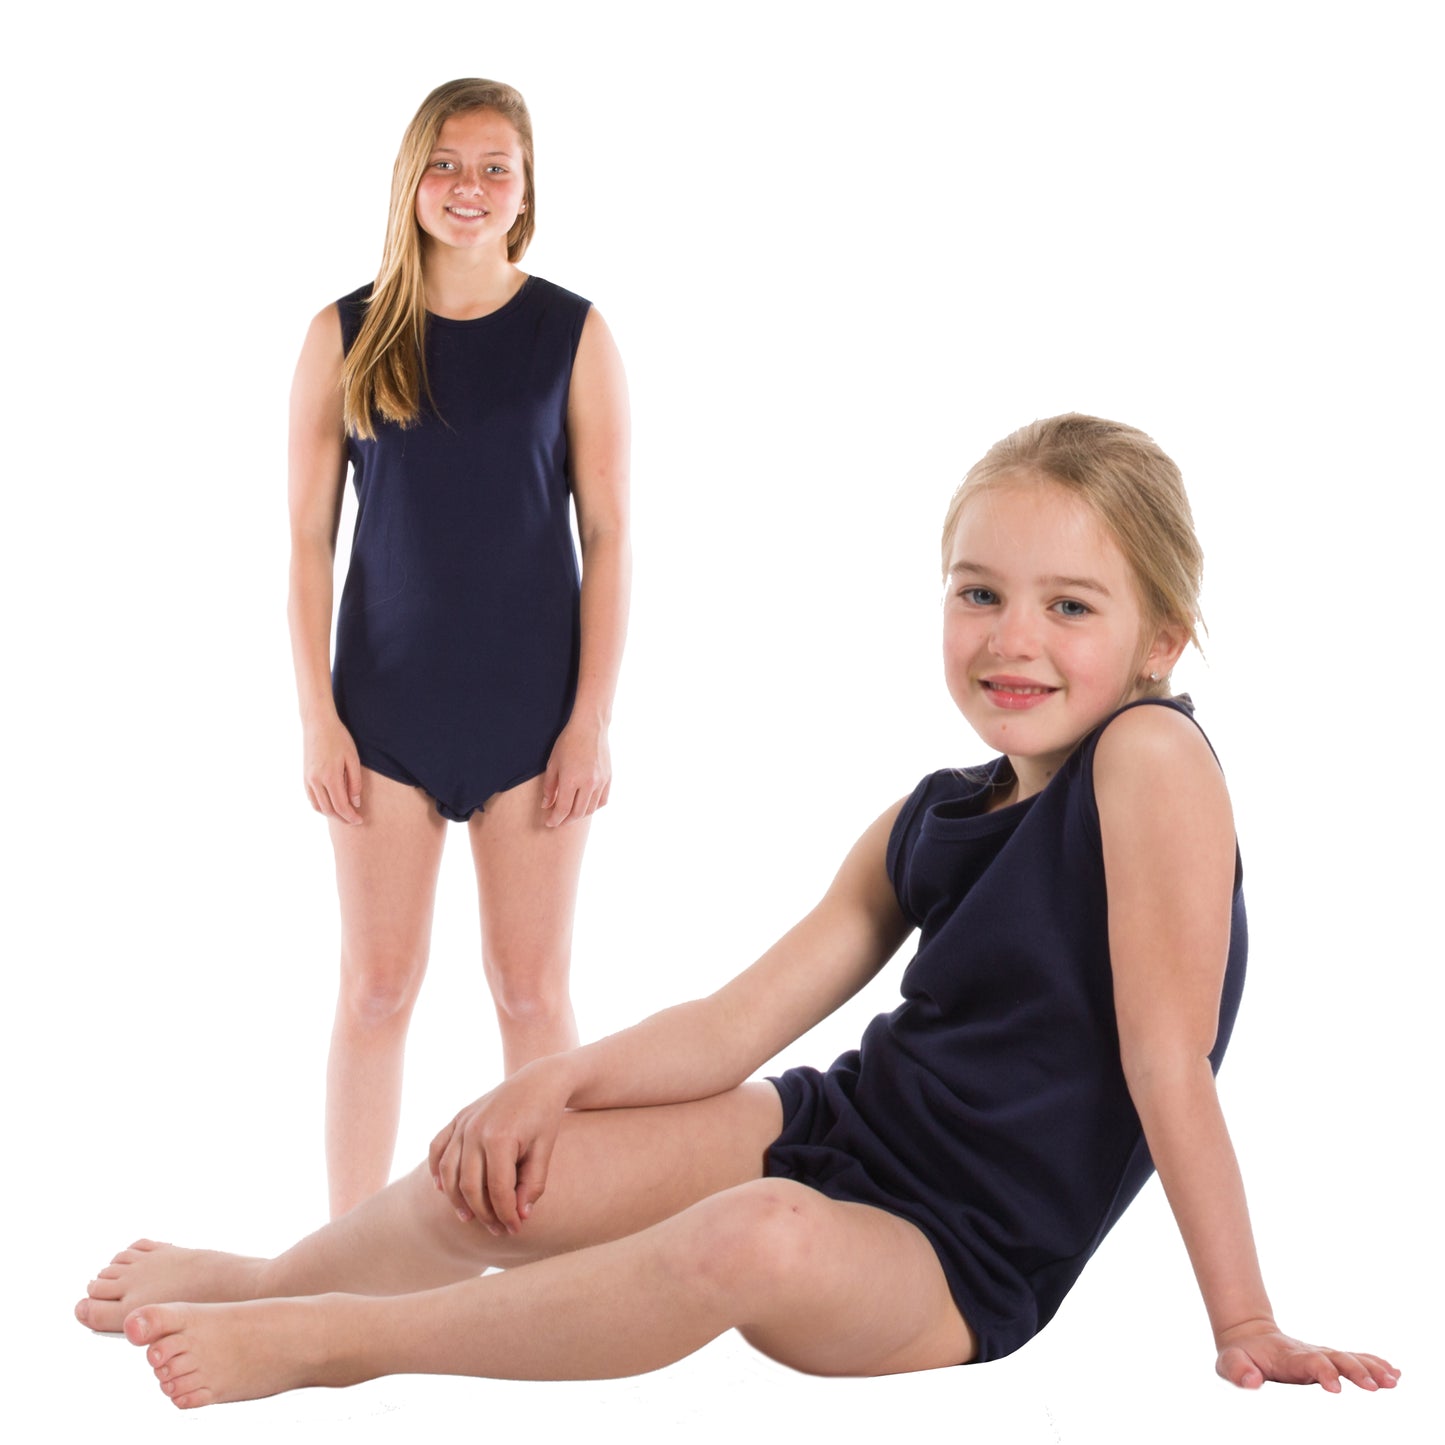 Children's Bodysuit with Popper Closure in the Crotch (4021)